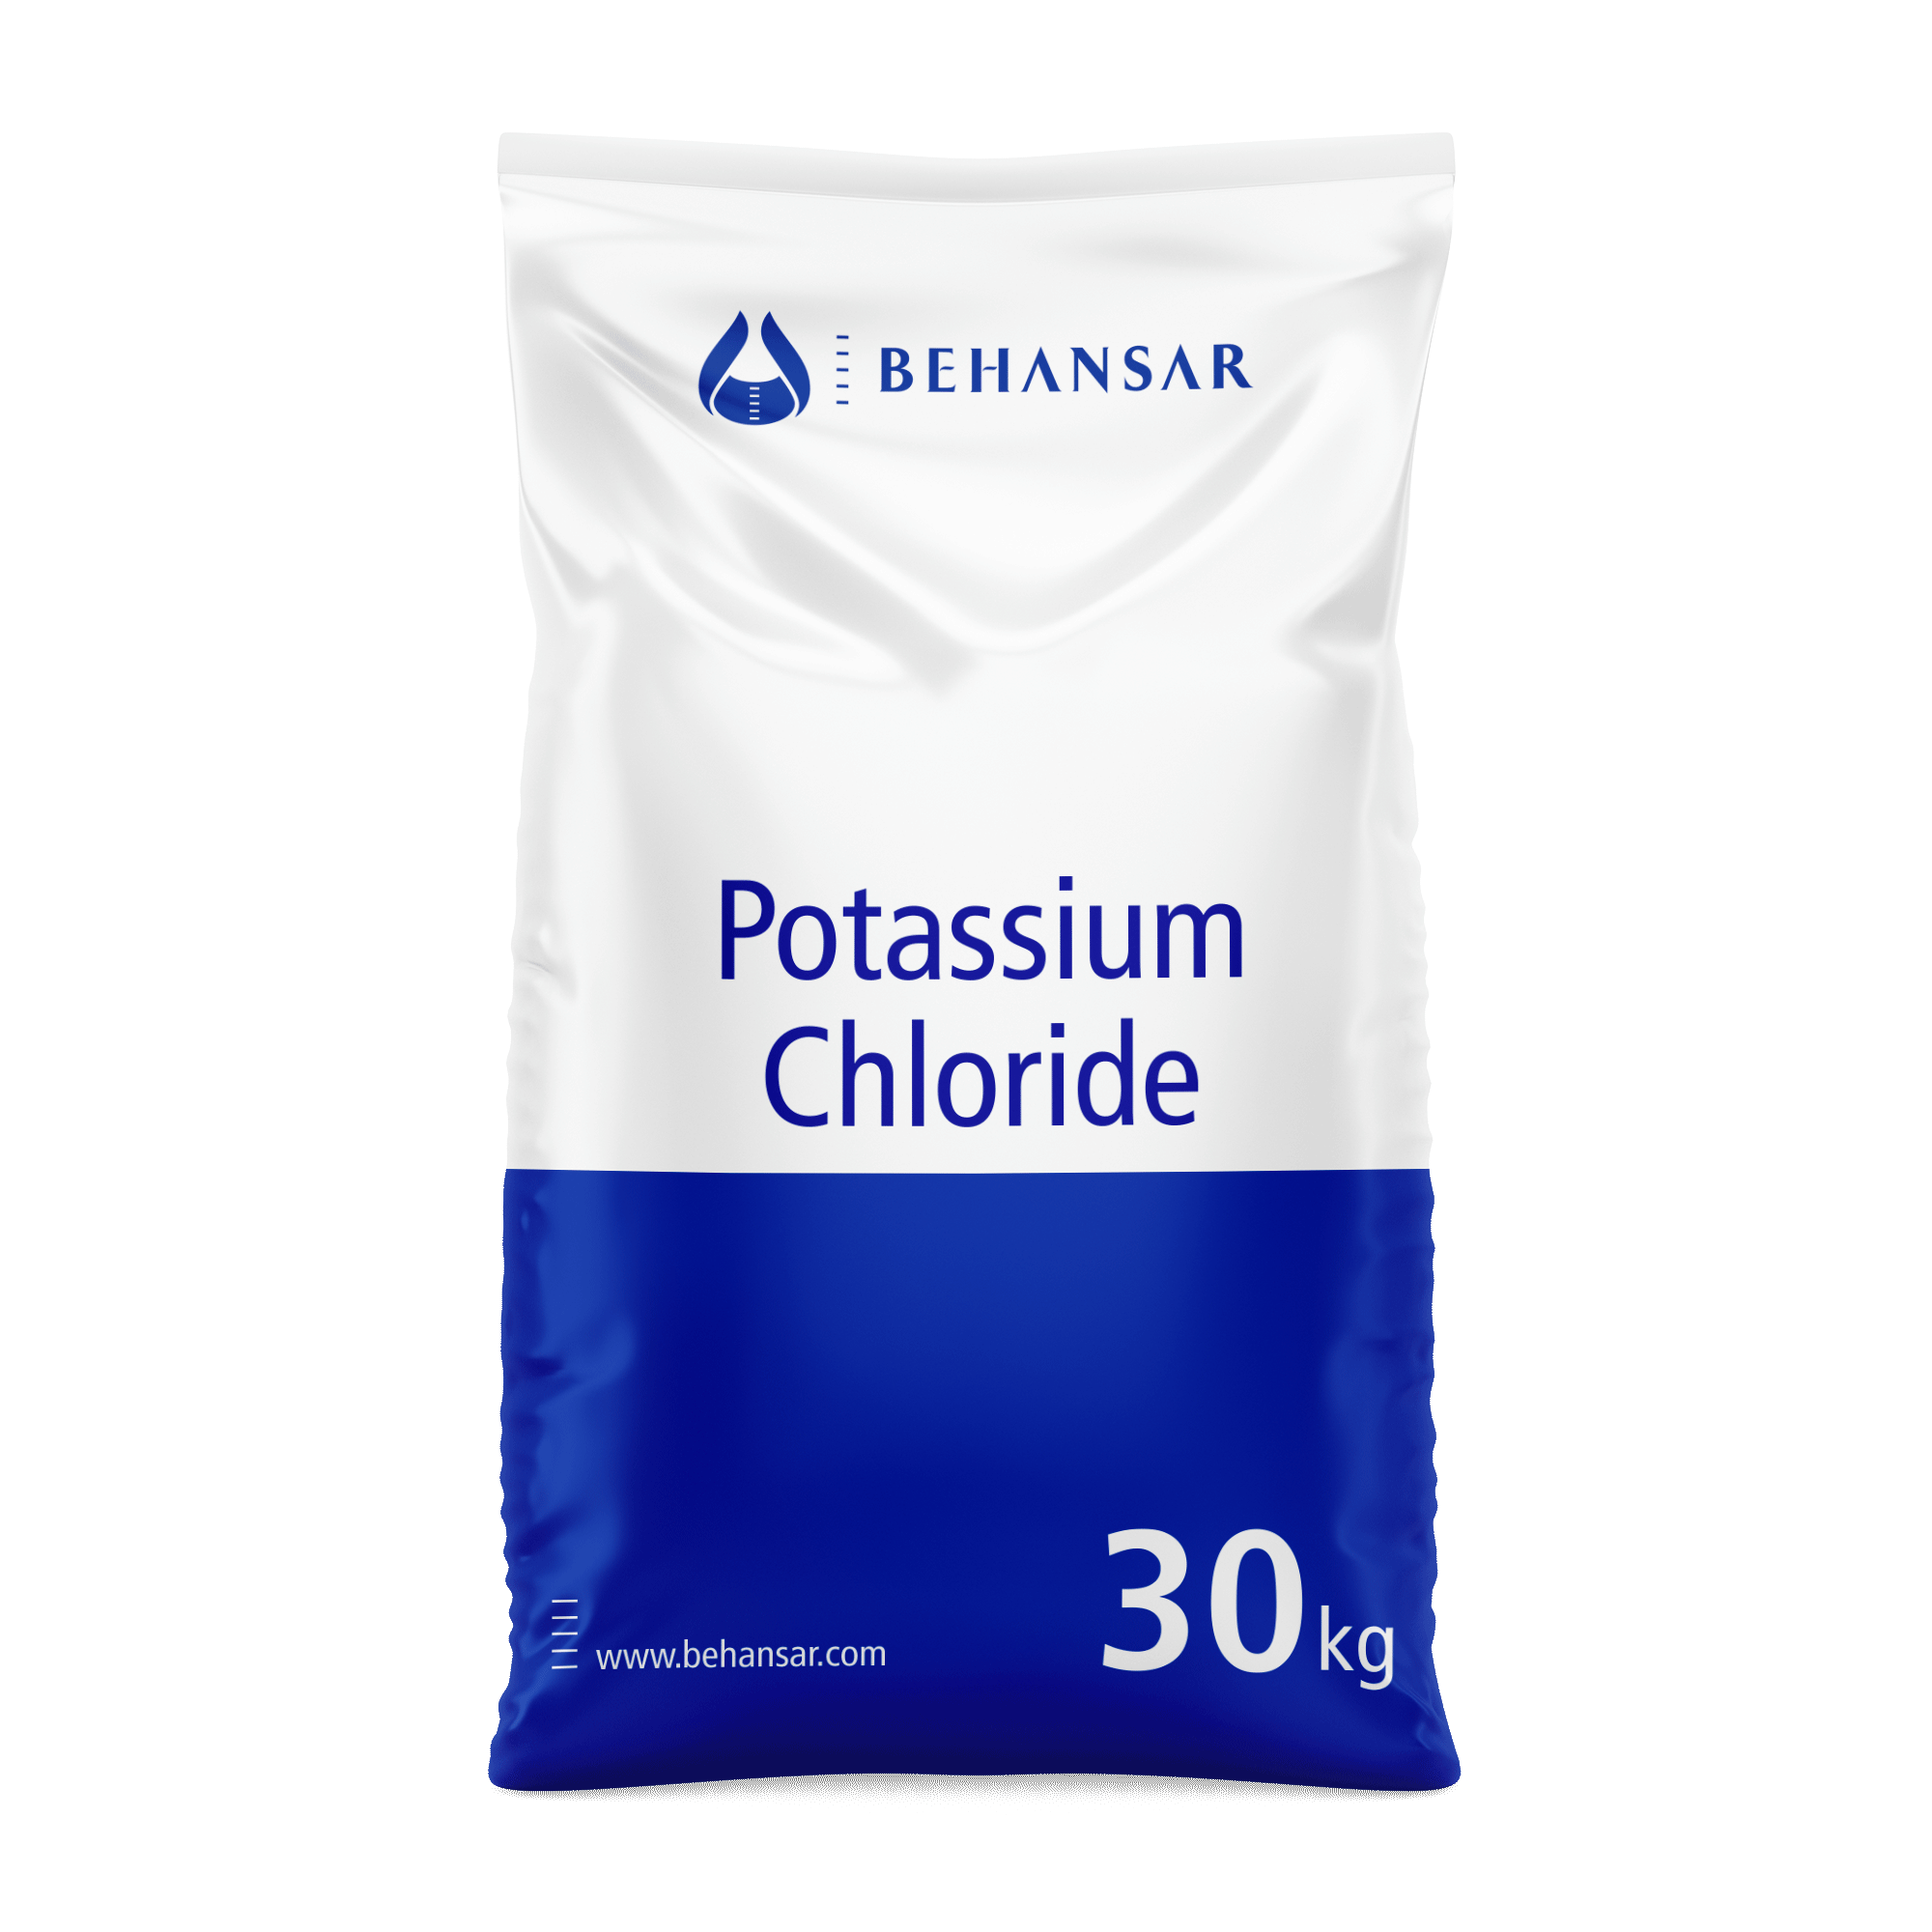 Potassium Chloride is one of the products of Behansar Co